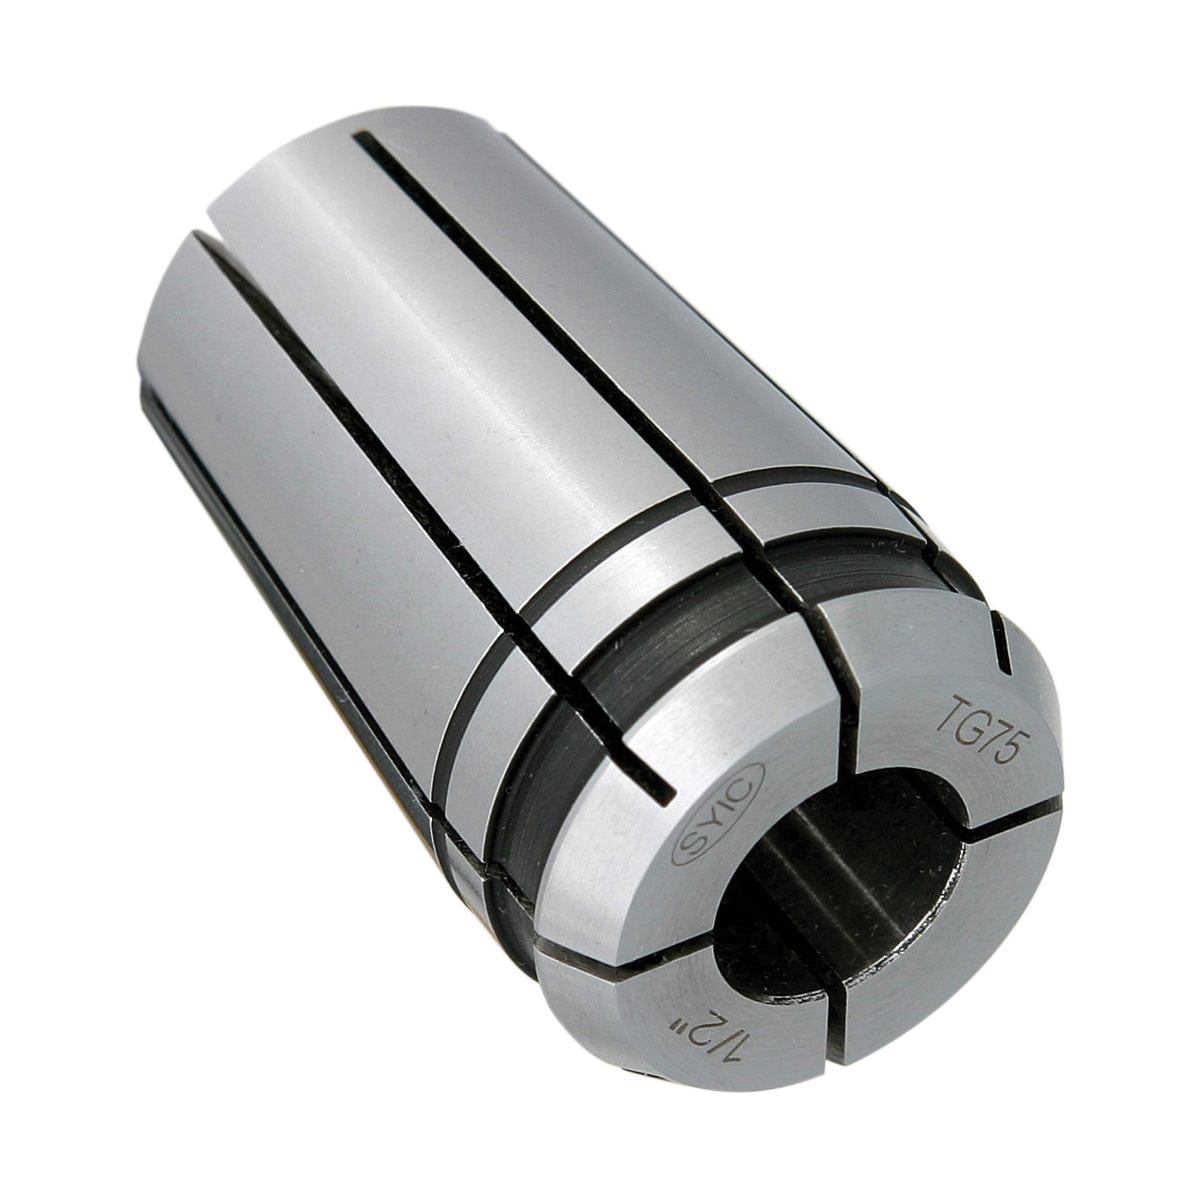 TG75 29/64" COLLET